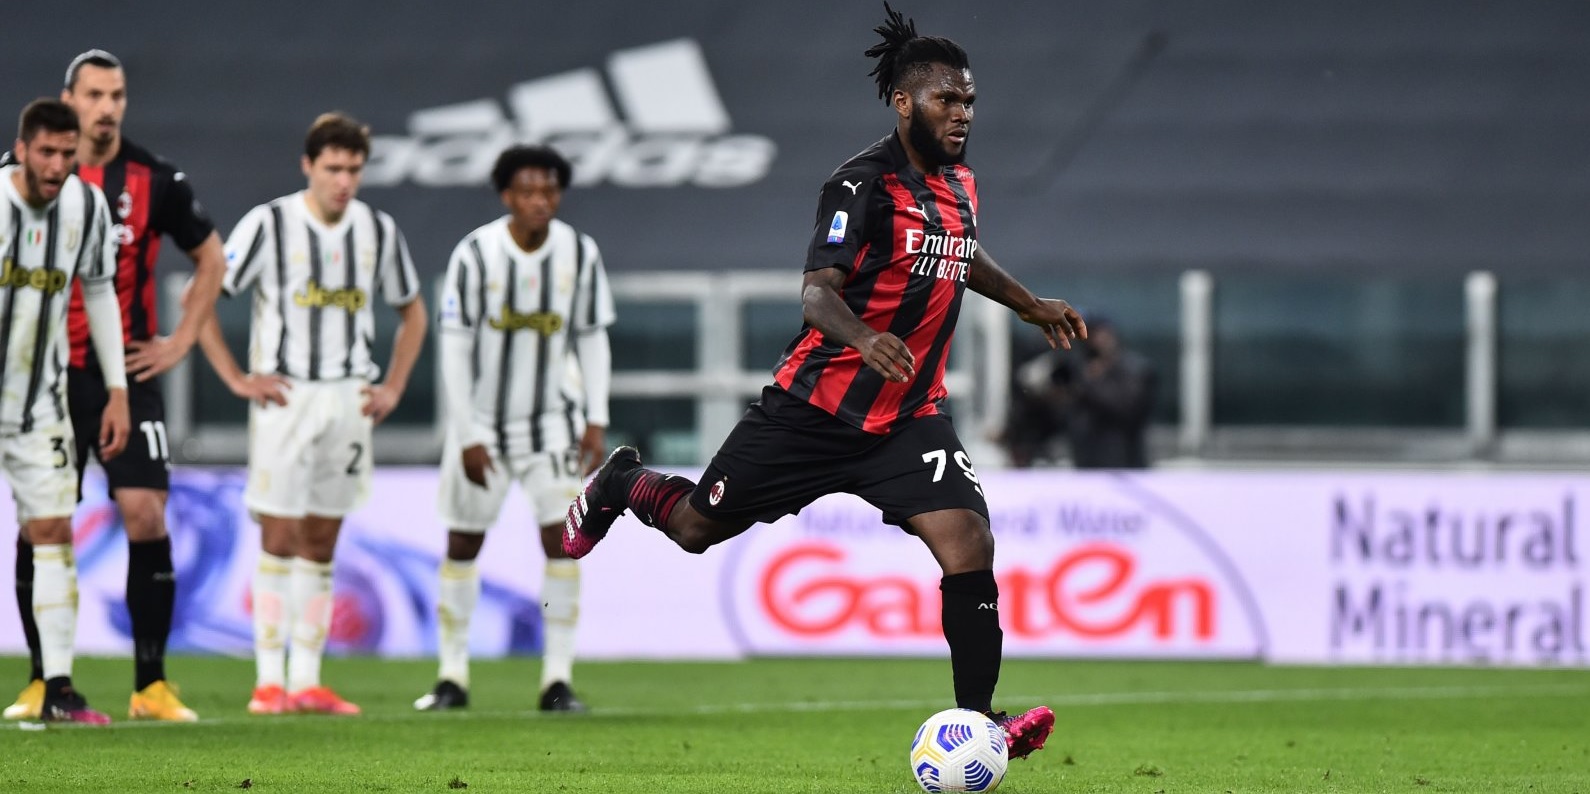 Liverpool-linked midfielder at odds with Serie A giants over new contract; Reds could theoretically agree pre-contract agreement in January – report